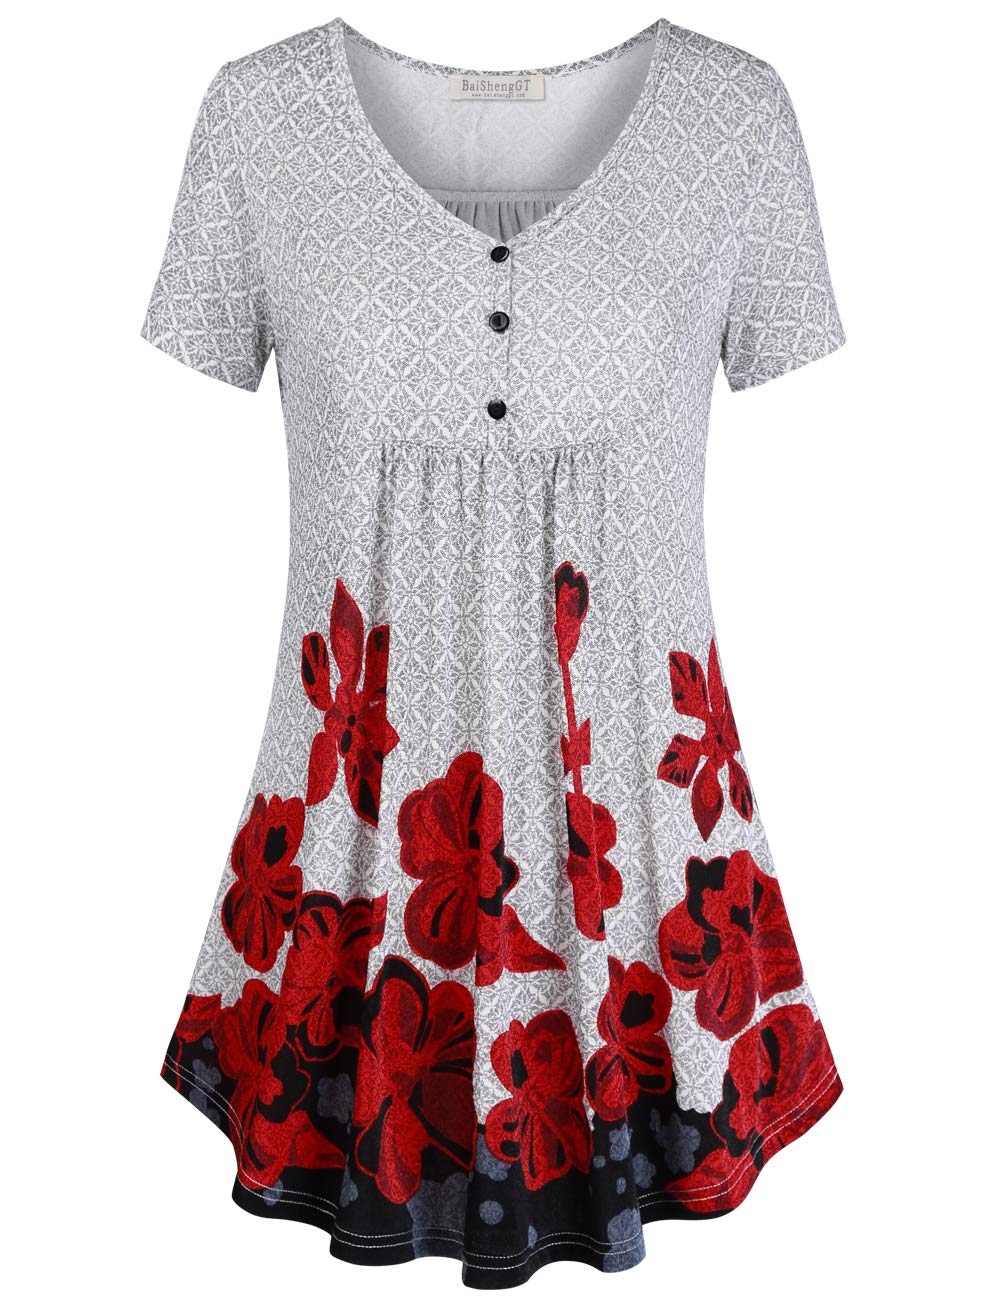 BAISHENGGT White Red Floral Women's V Neck Buttons Pleated Flared Comfy Tunic Tops